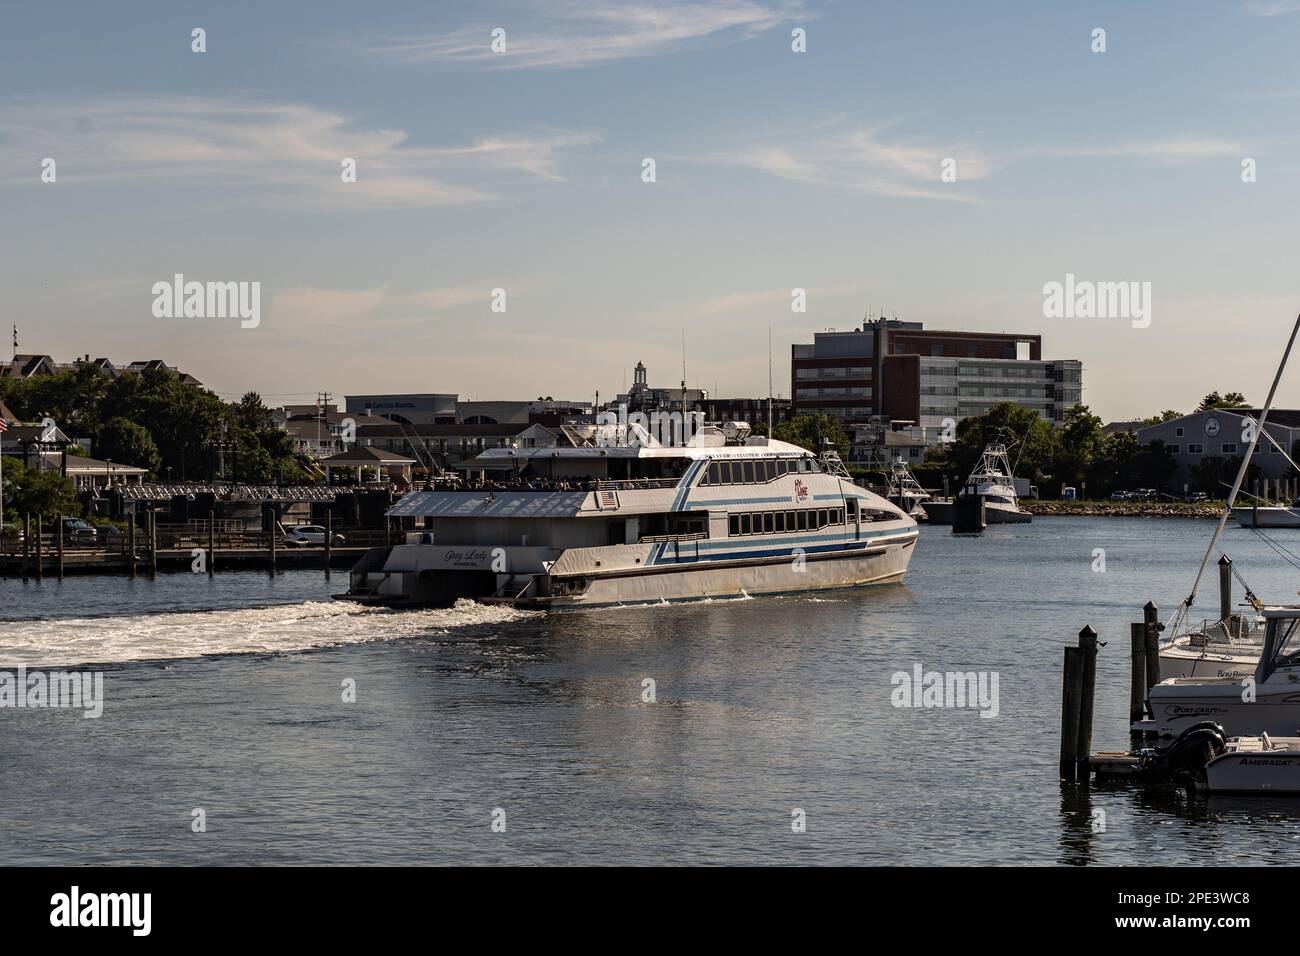 HHyannis Port, Massachusetts - July 8, 2022: Hy-Line high speed ferry leaves in Hyannis Port on a trip to Martha’s Vineyard Stock Photo